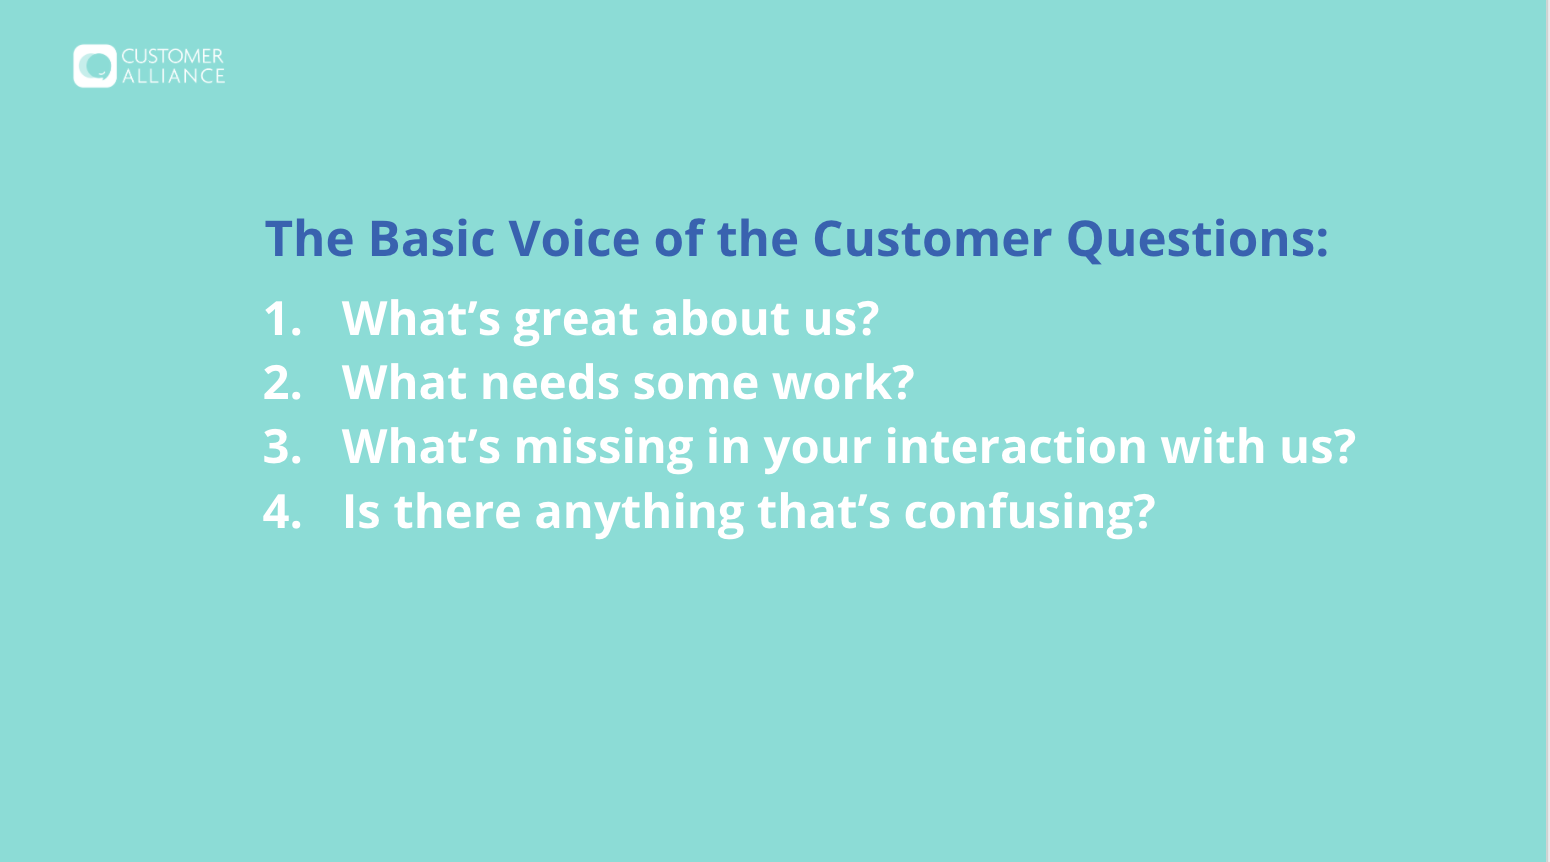 A list of the four basic voice of the customer questions